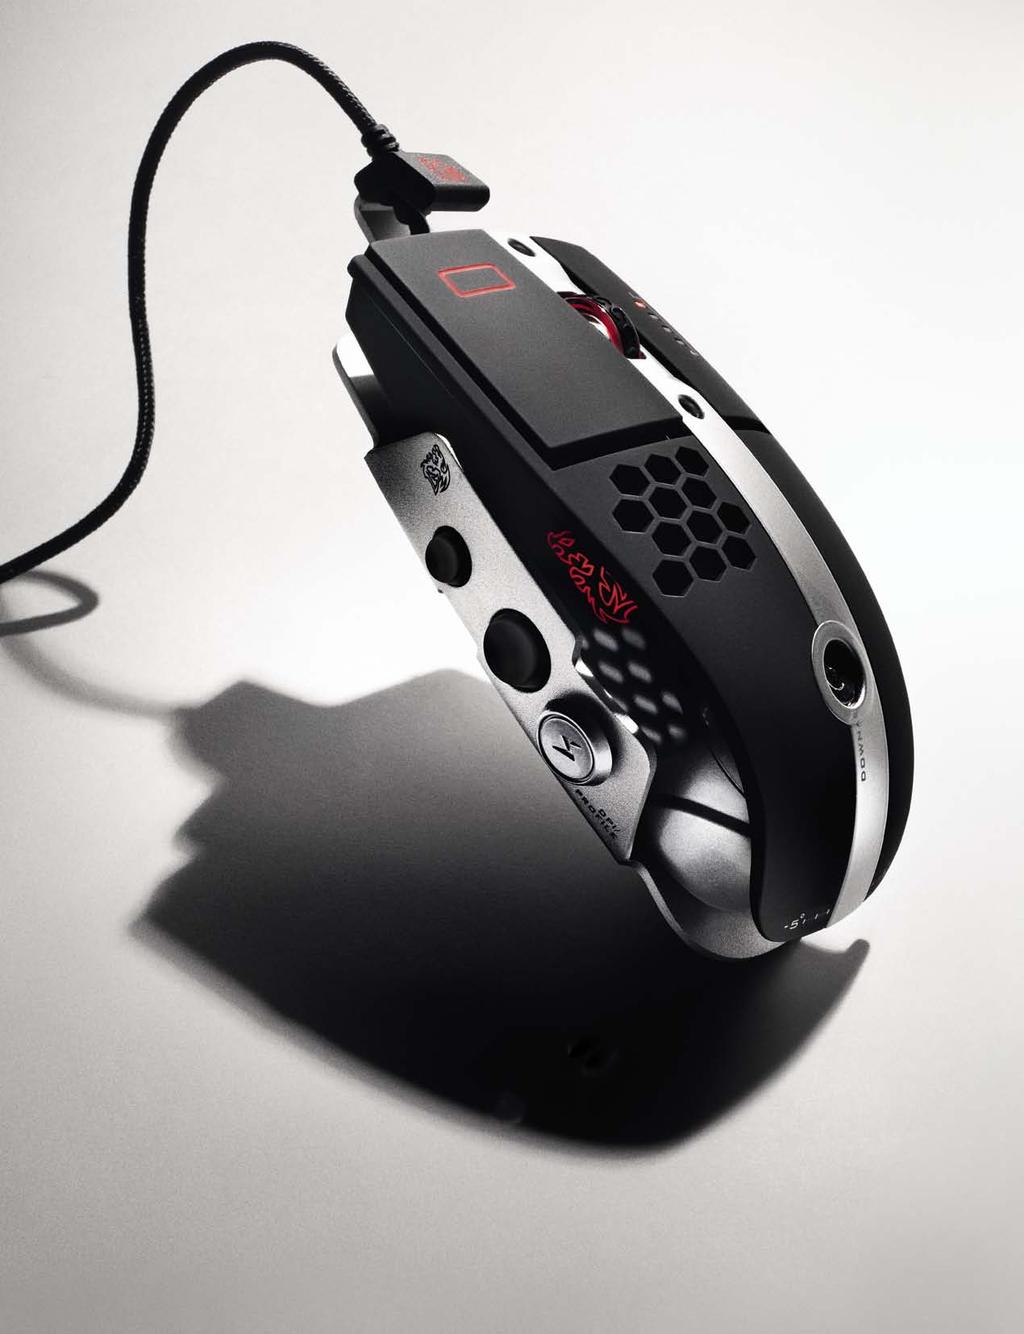 IQ Level 10 M Mouse A computer mouse for professional gamers.